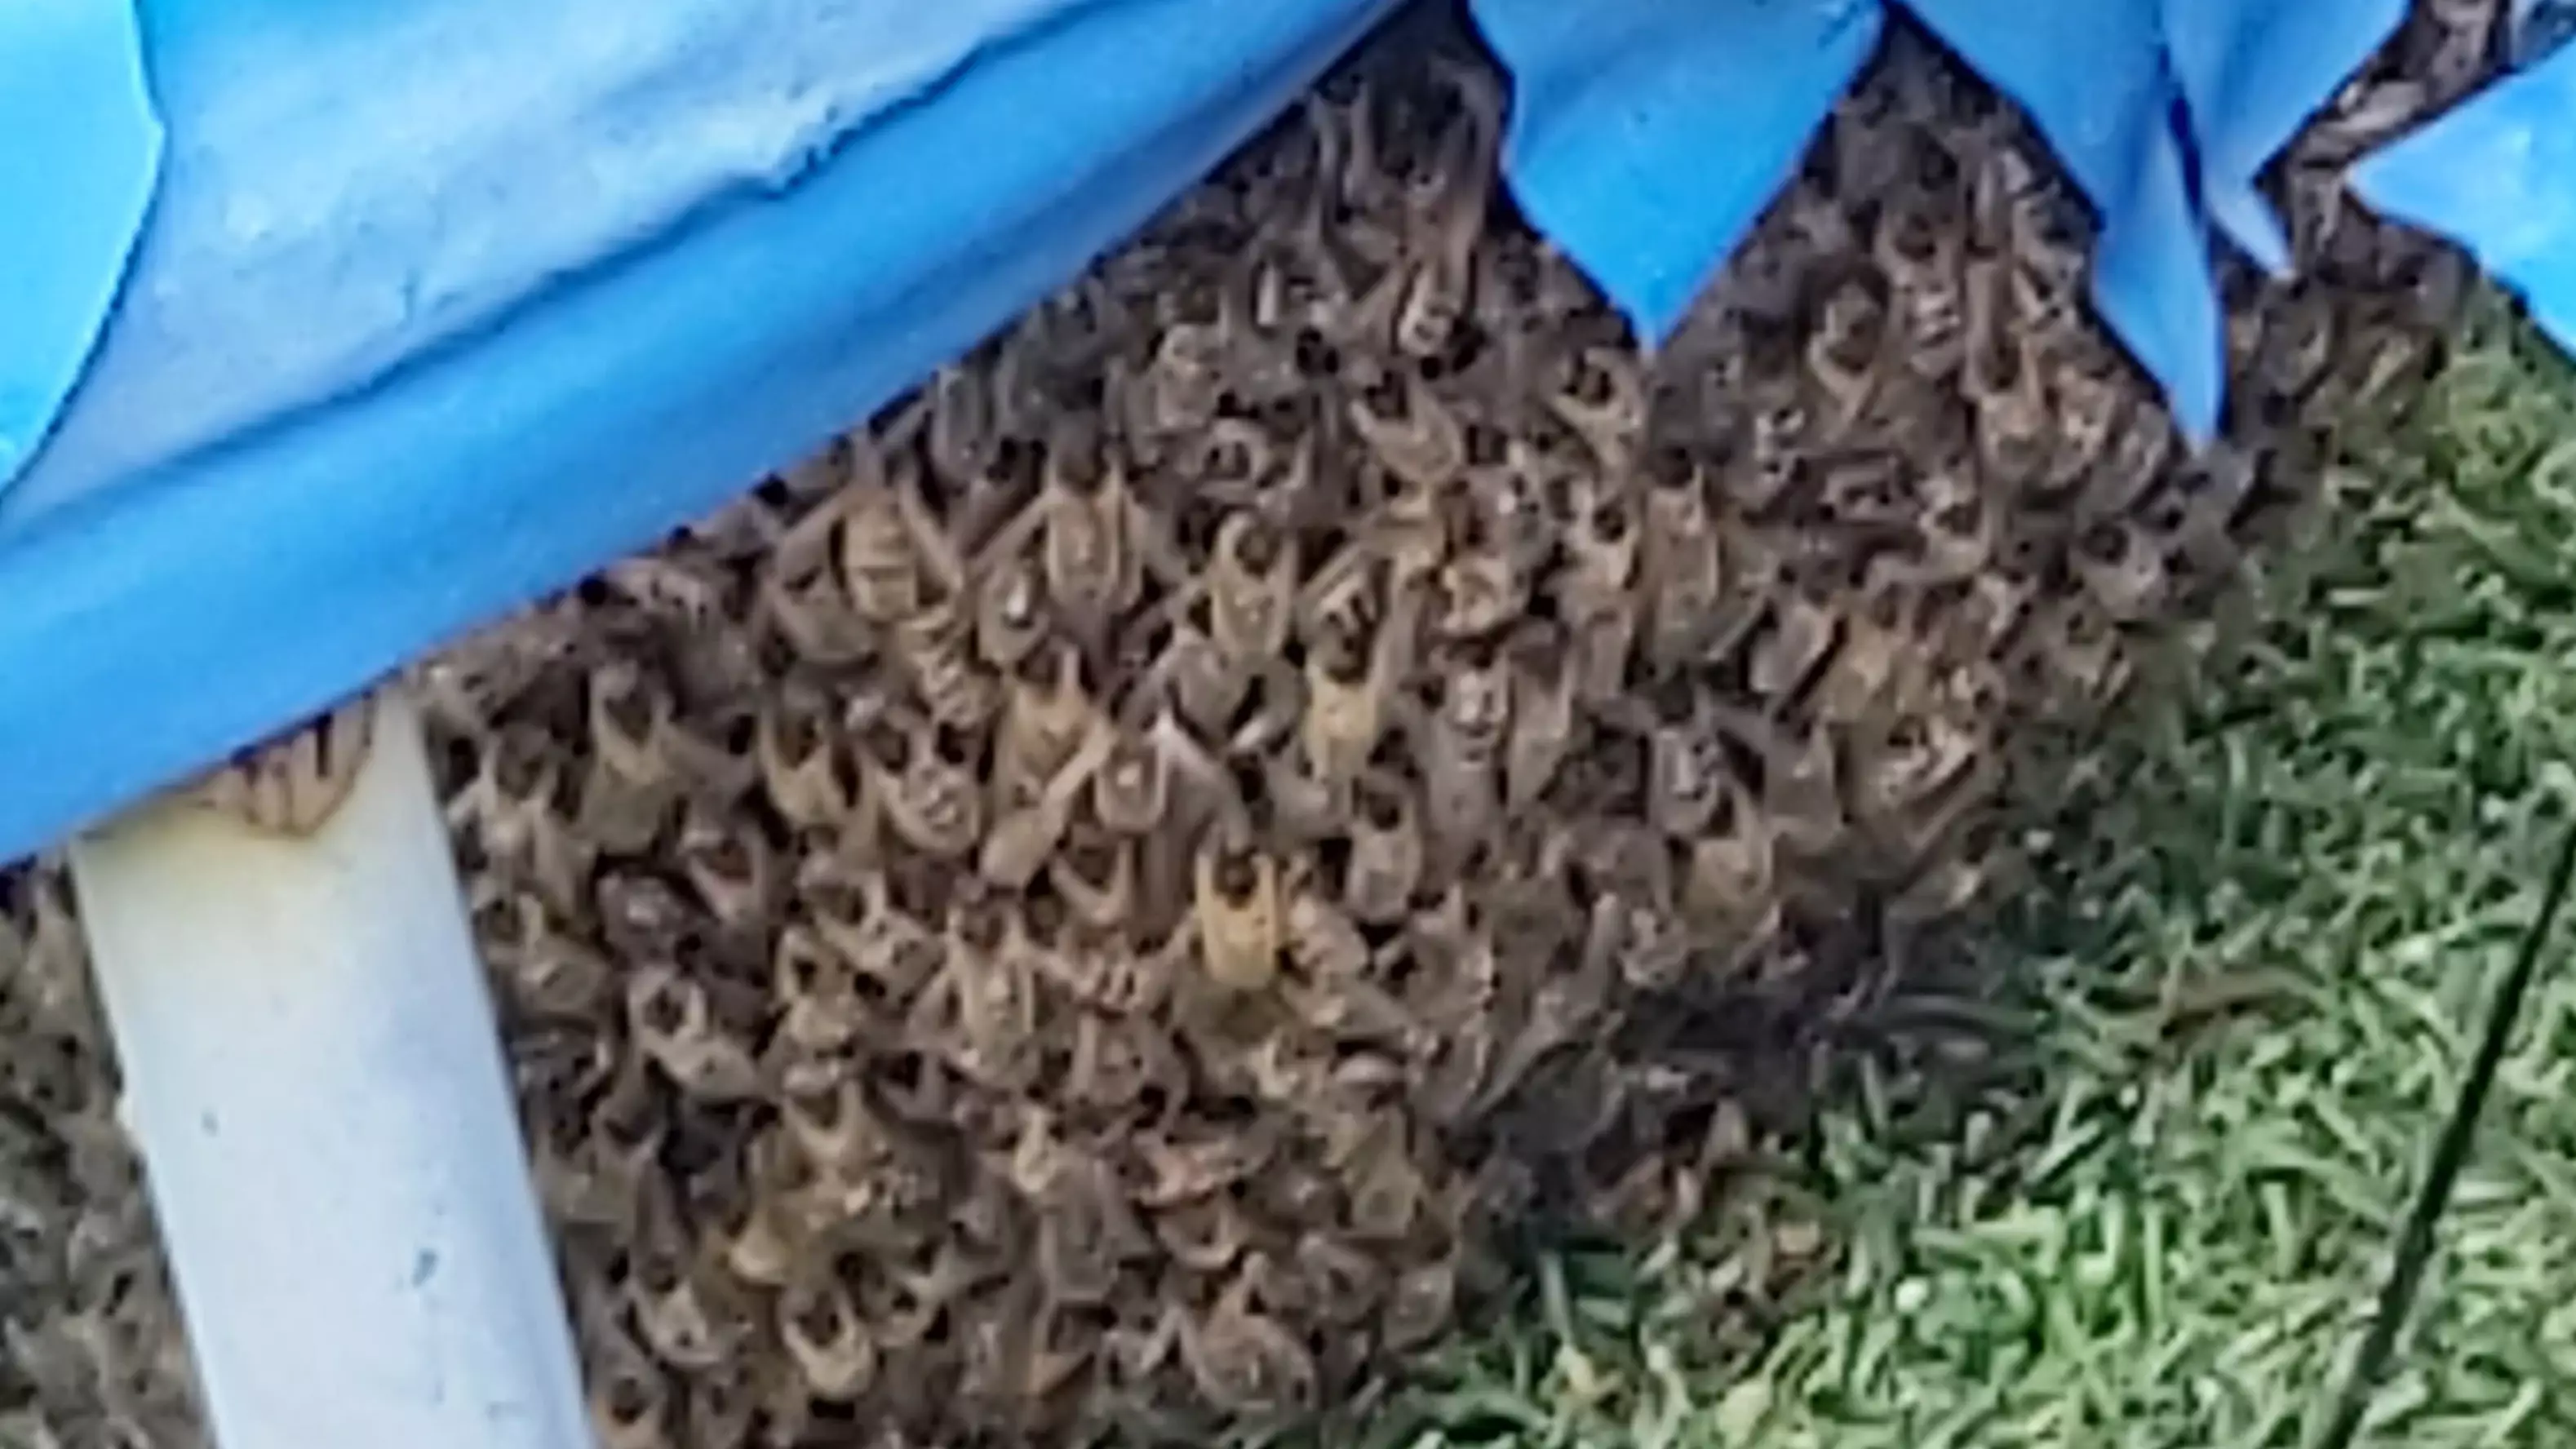 Family's Trampoline Invaded By Thousands Of Bees